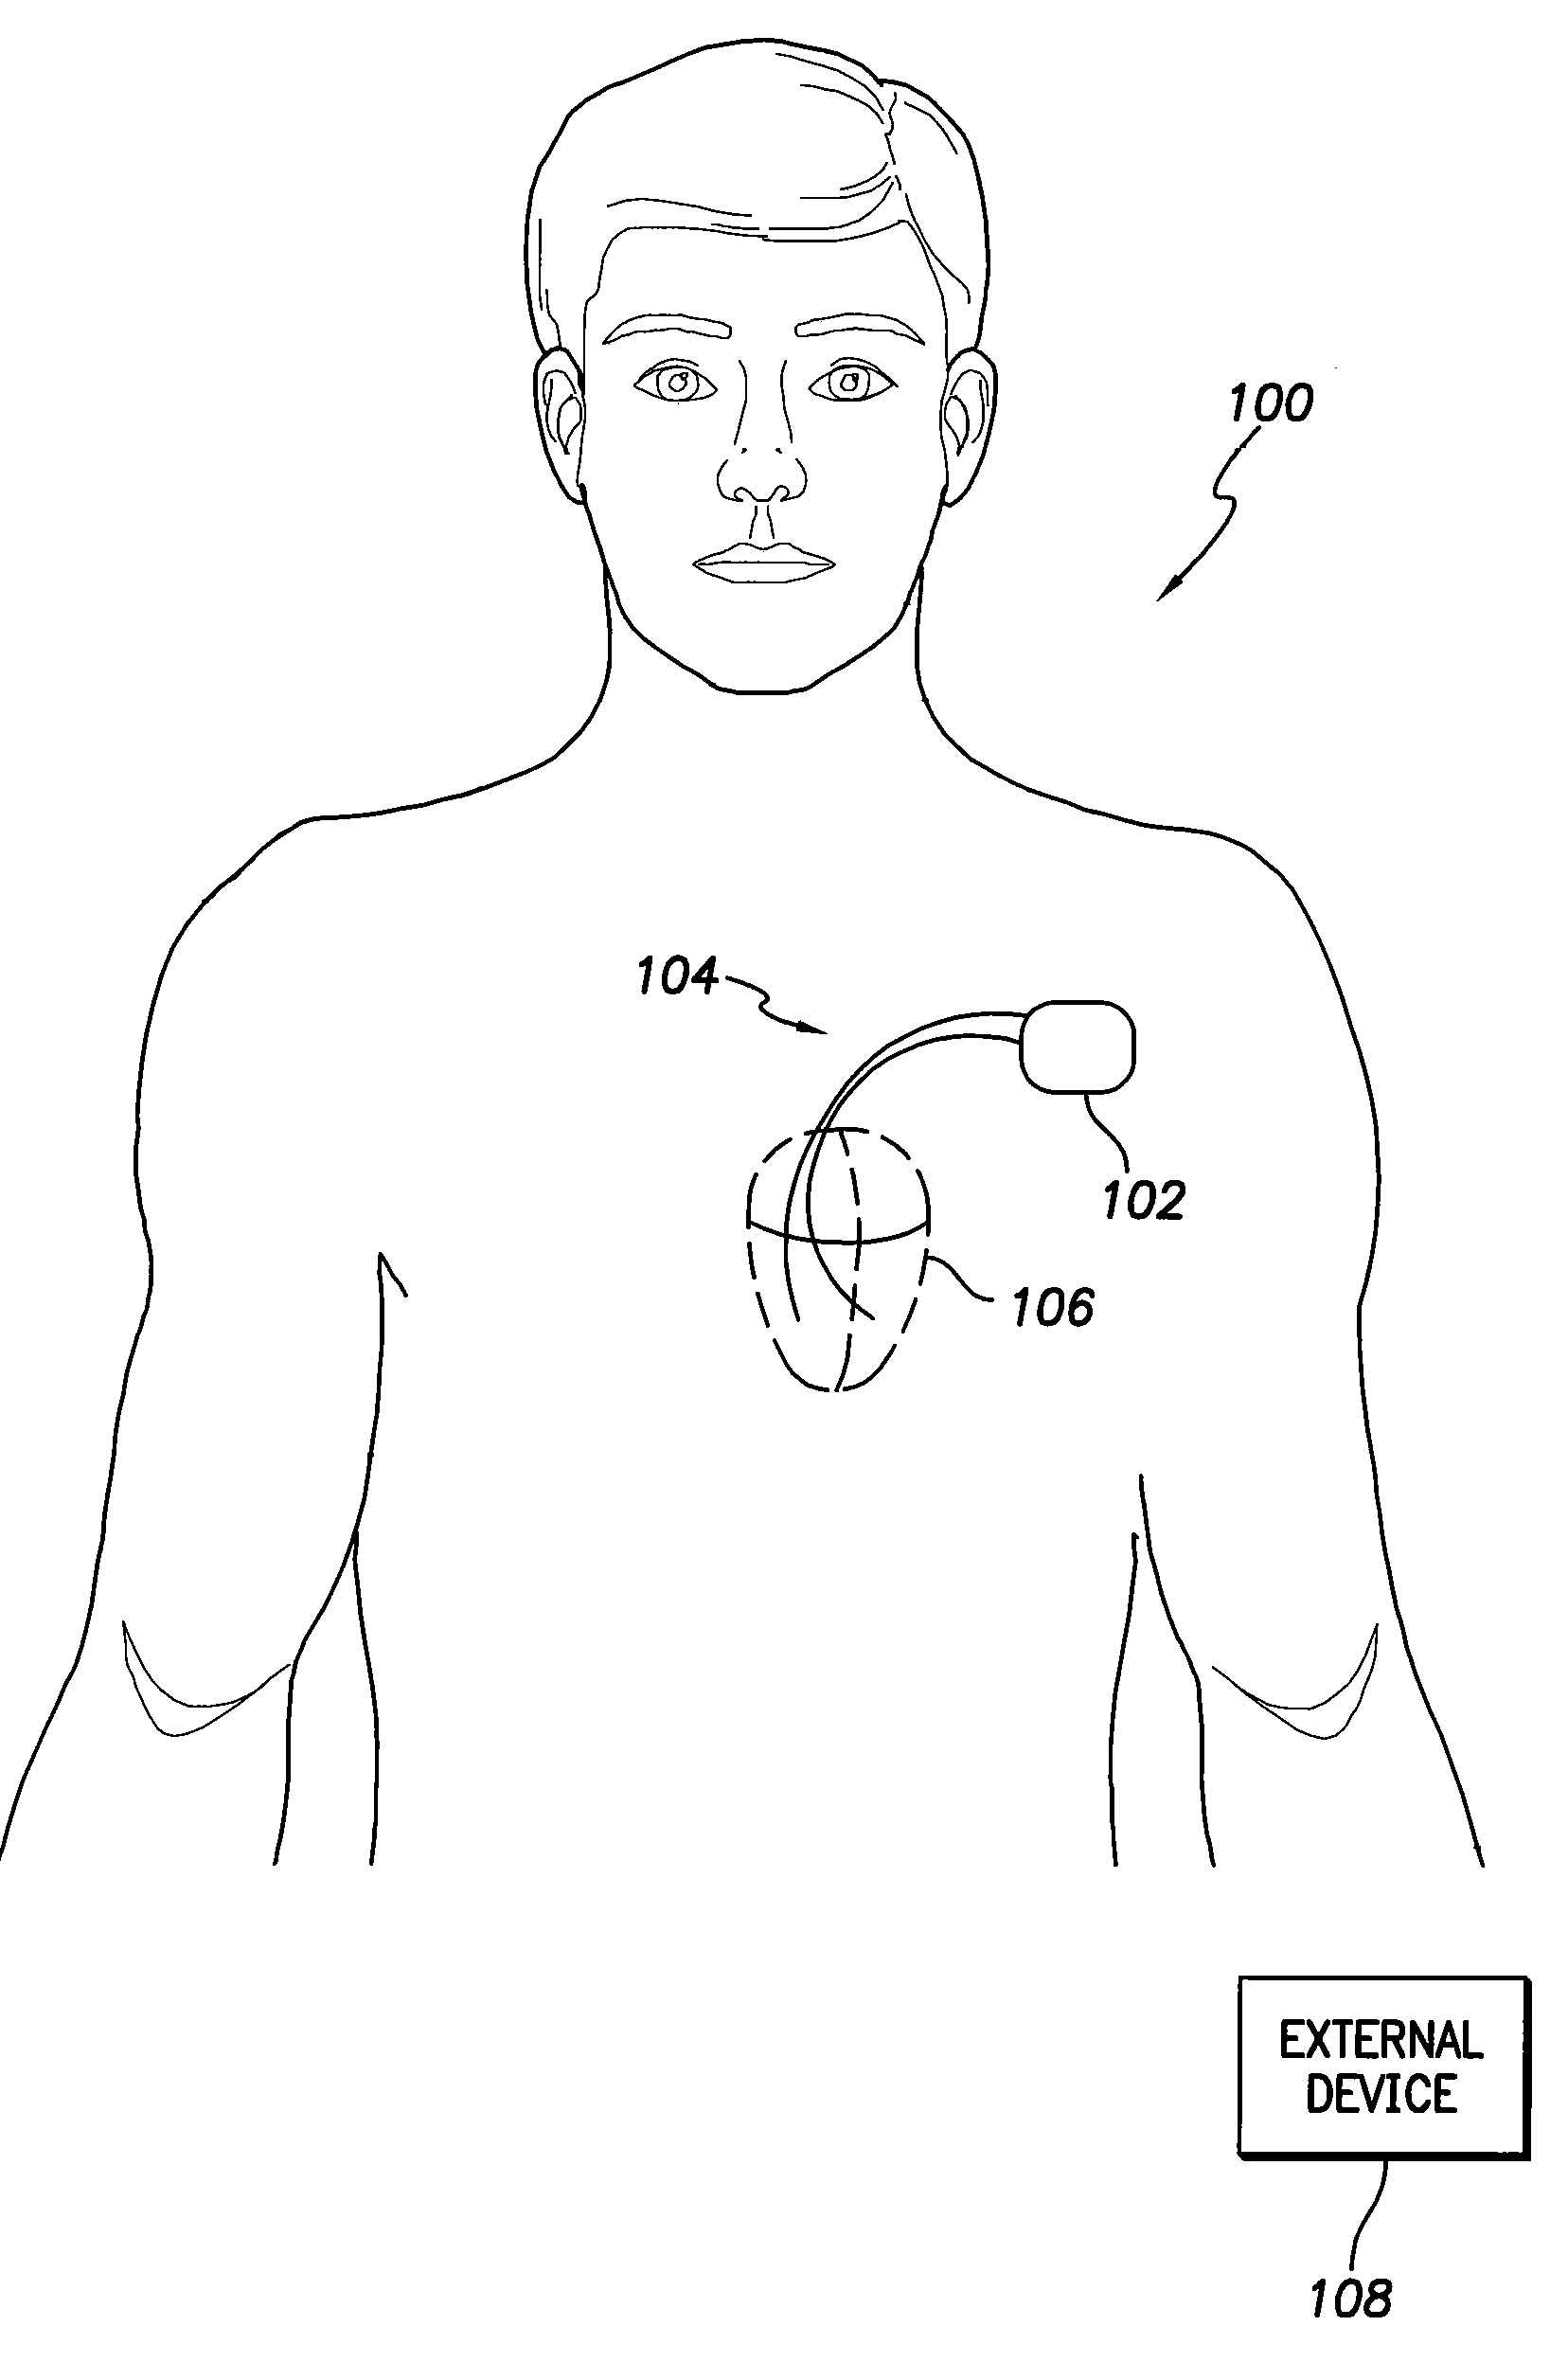 System and method for identifying a potential cause of pulmonary edema